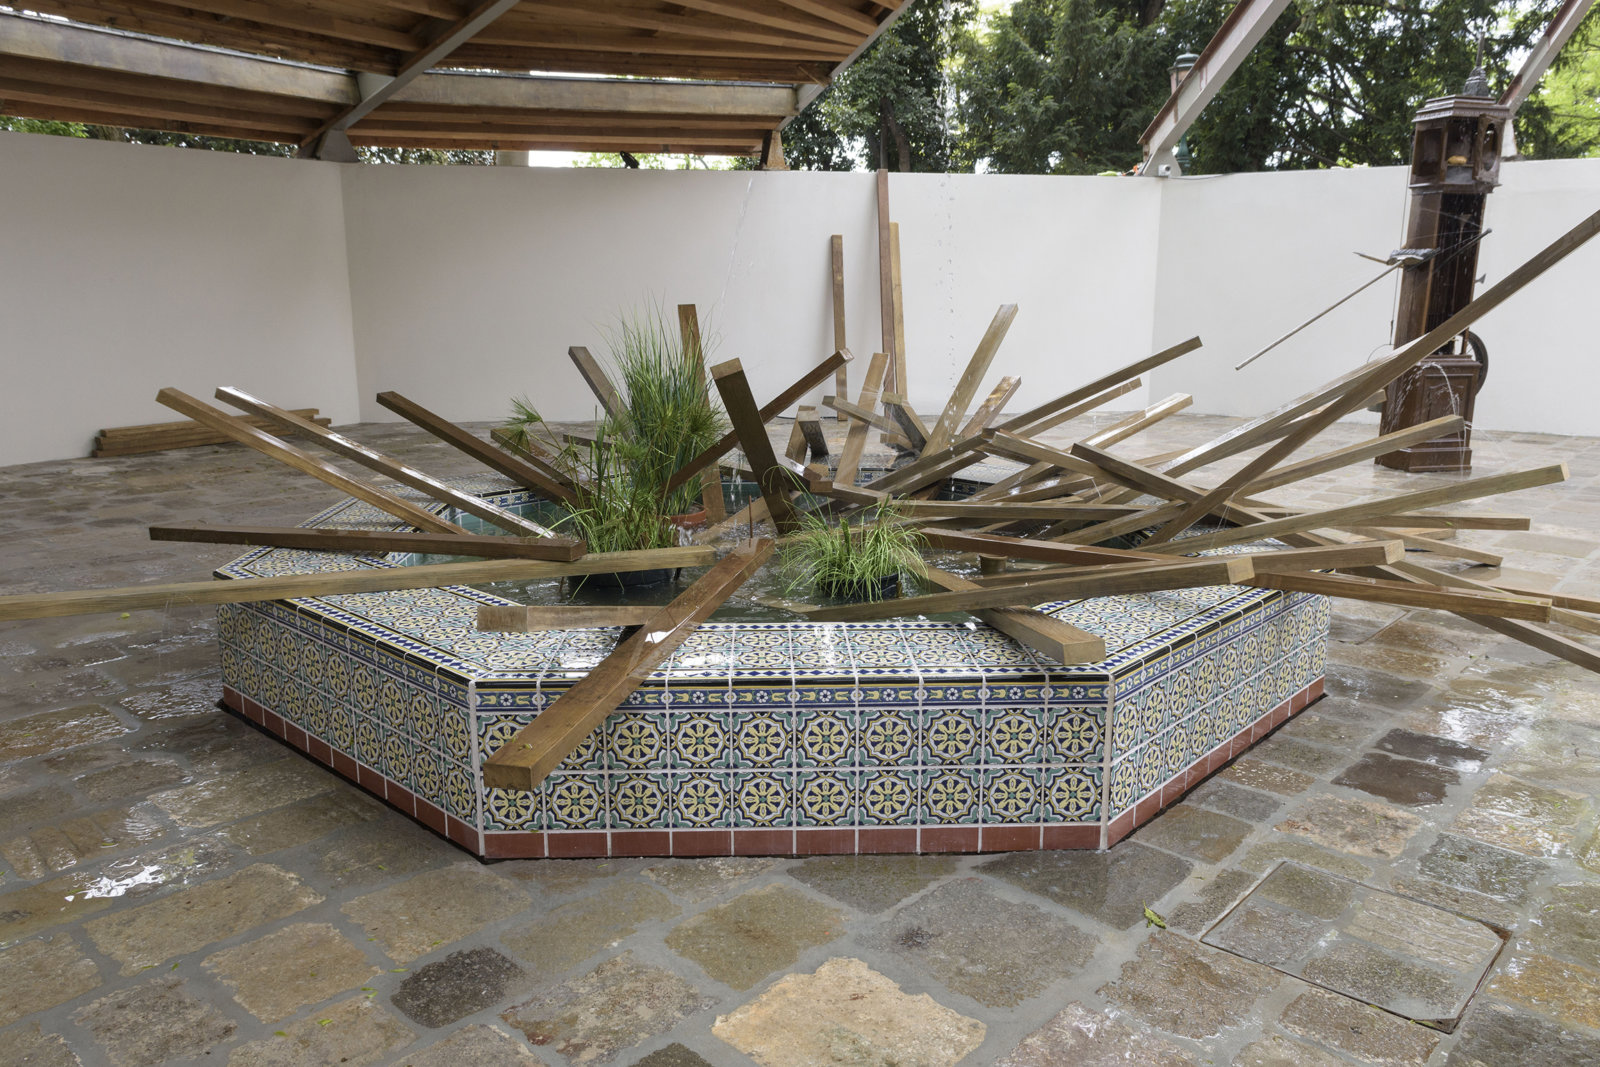 Geoffrey Farmer, SFAI Fountain, 2017, resin structure covered by ceramic tiles, artificial plants, acid-etched brass, waterworks, 150 x 150 x 19 in. (381 x 381 x 47 cm). Installation view, A way out of the mirror, Canada Pavilion, 57th Venice Biennale, Venice, Italy